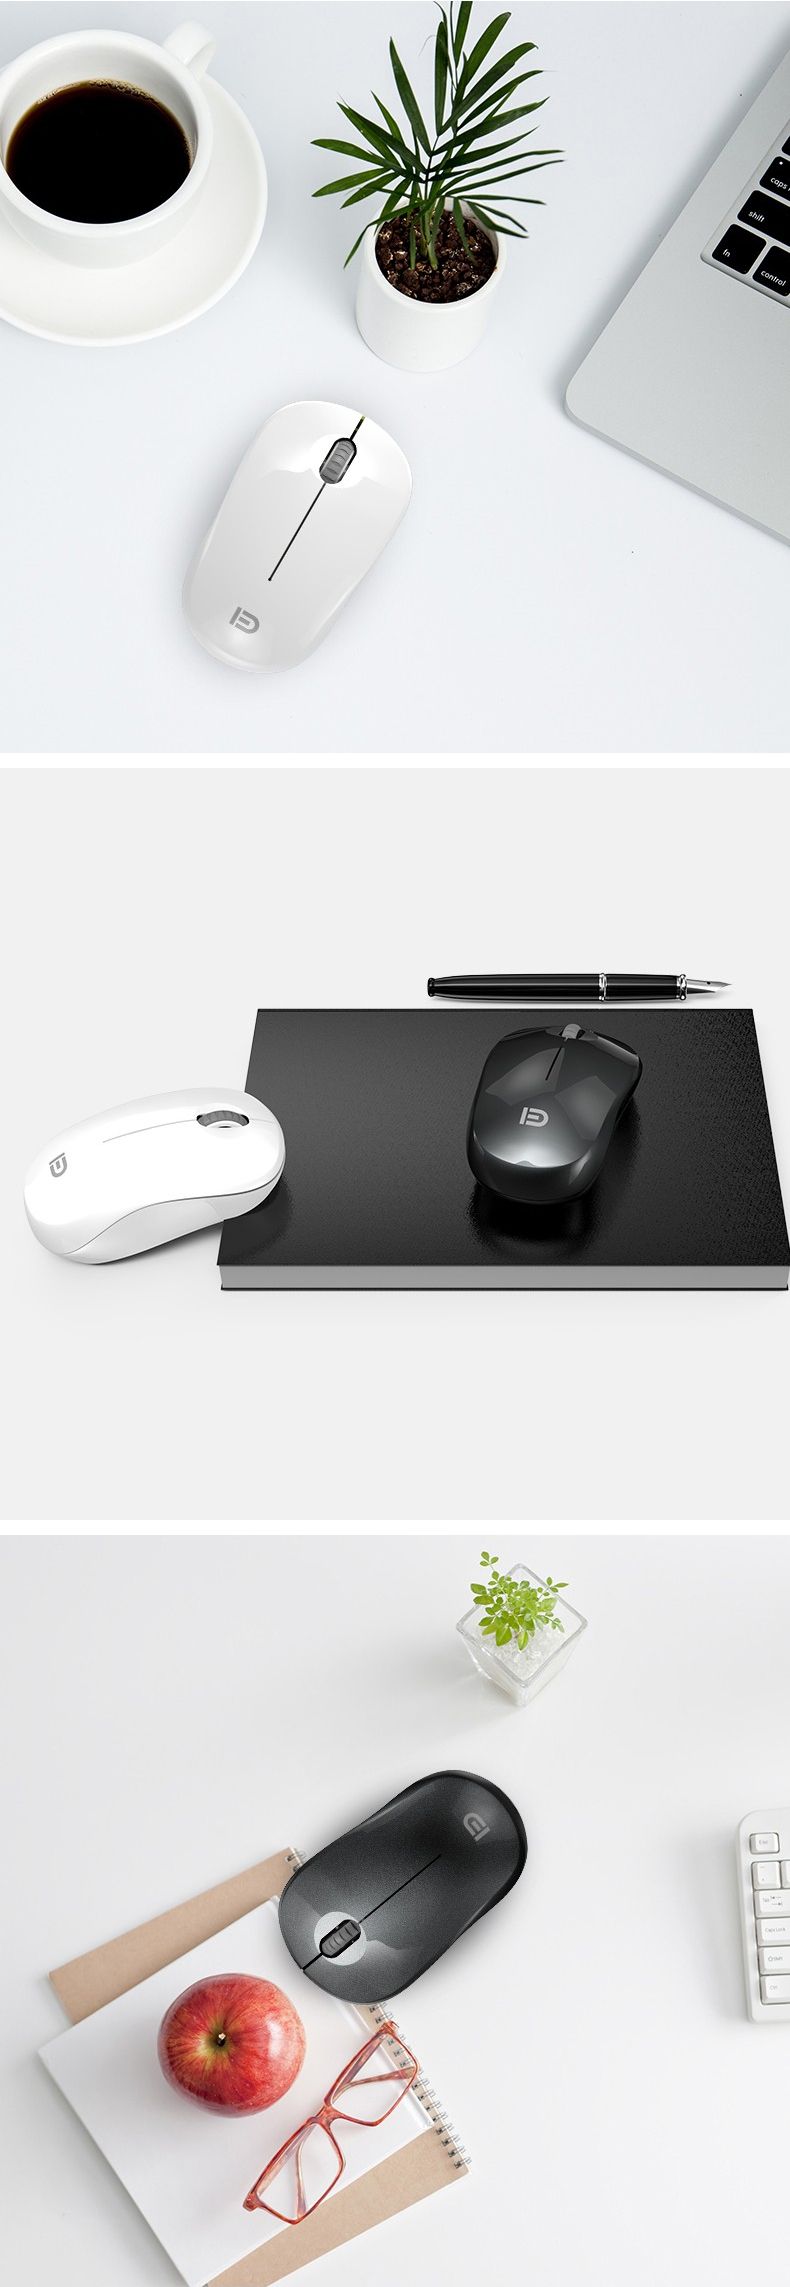 FD-I2M-Portable-Rechargeable-Wireless-Mouse-Home-Office-Silent-Mouse-Desktop-Computer-Notebook-Unive-1626162